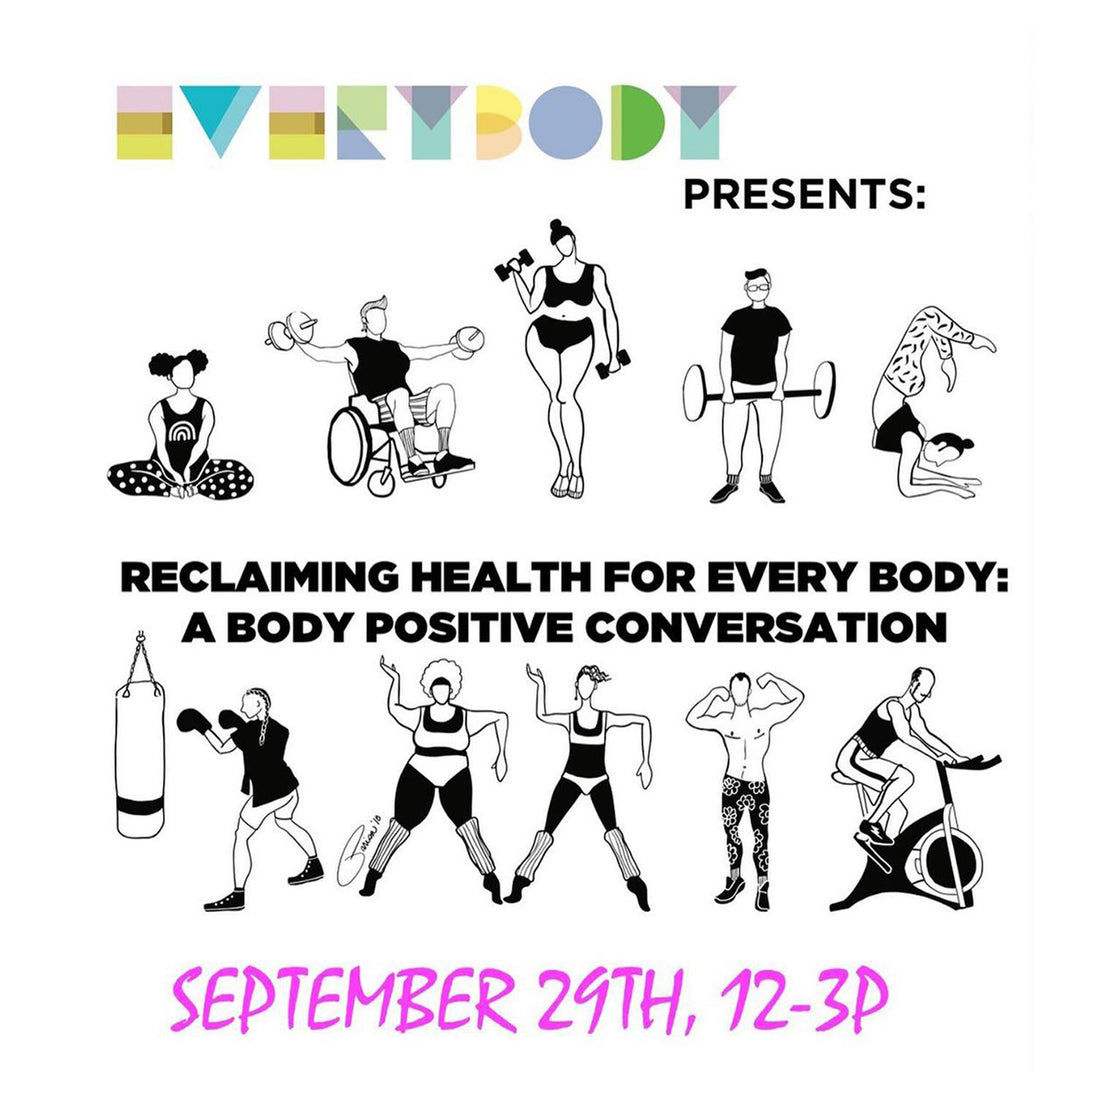 Reclaiming Health for Every Body: A Body Positive Conversation hosted by EVERYBODY Los Angeles and sponsored by Superfit Hero